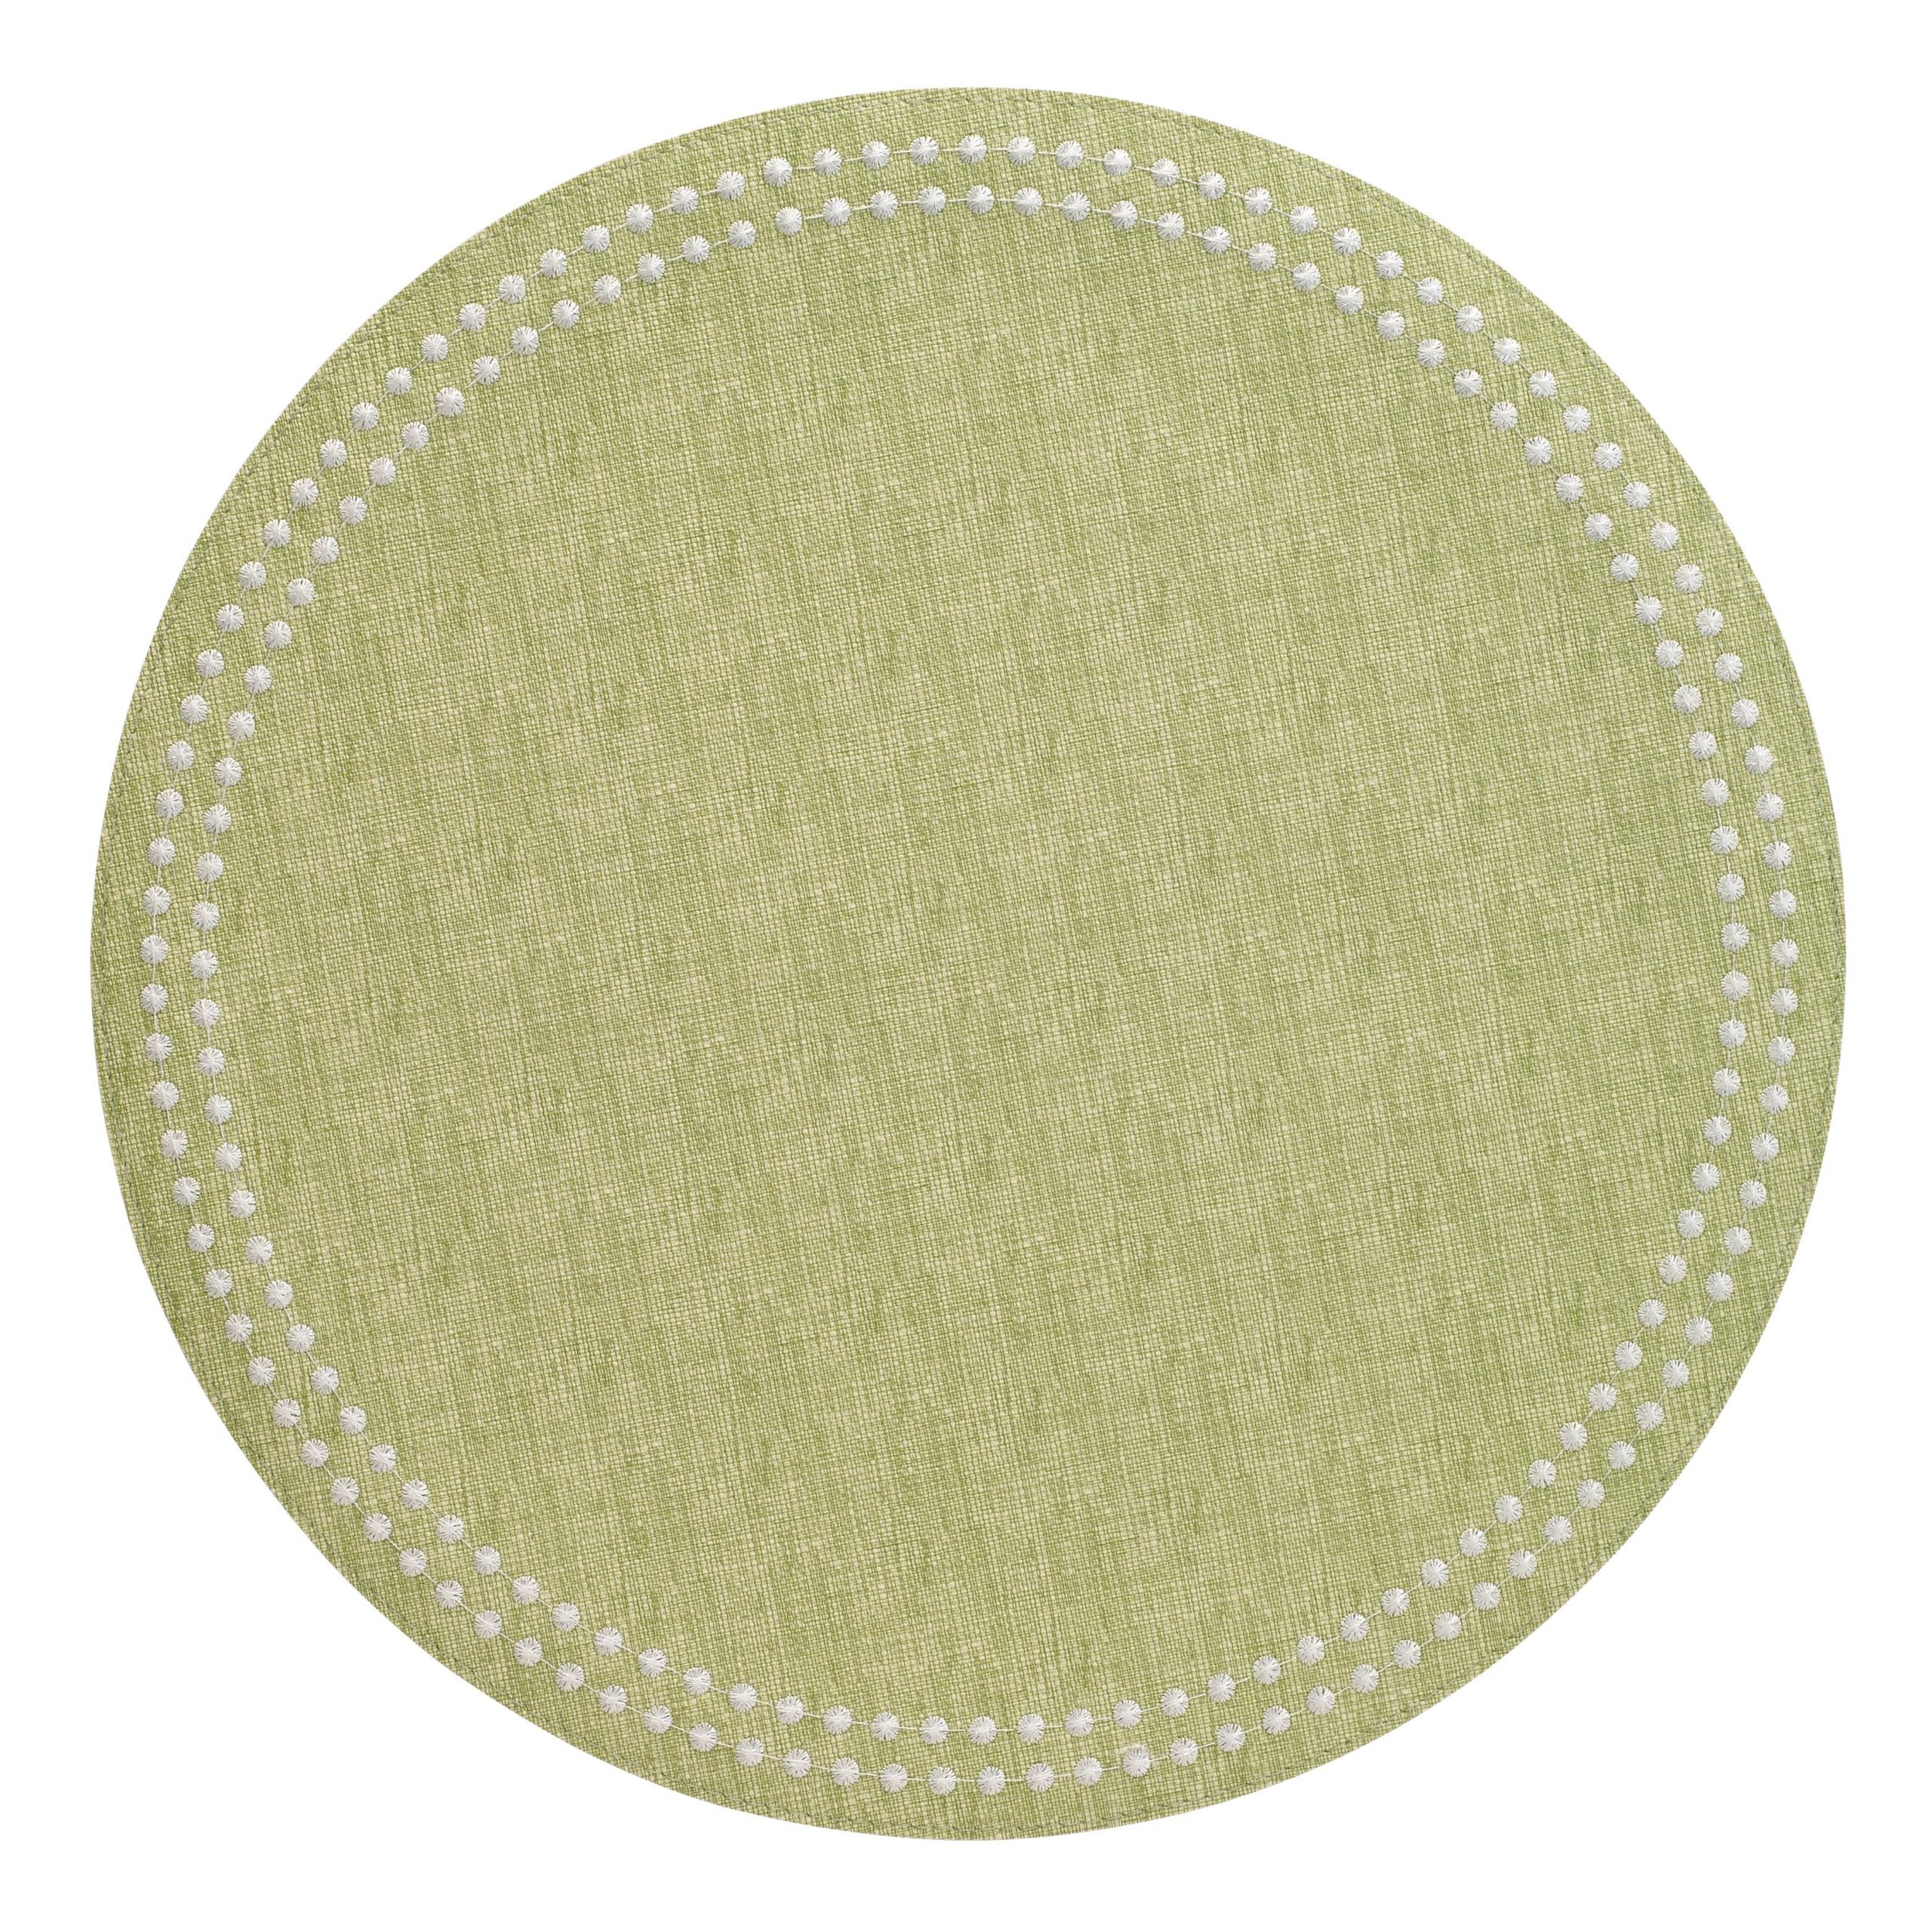 Round Pearls Fern White Placemat - Set of 2